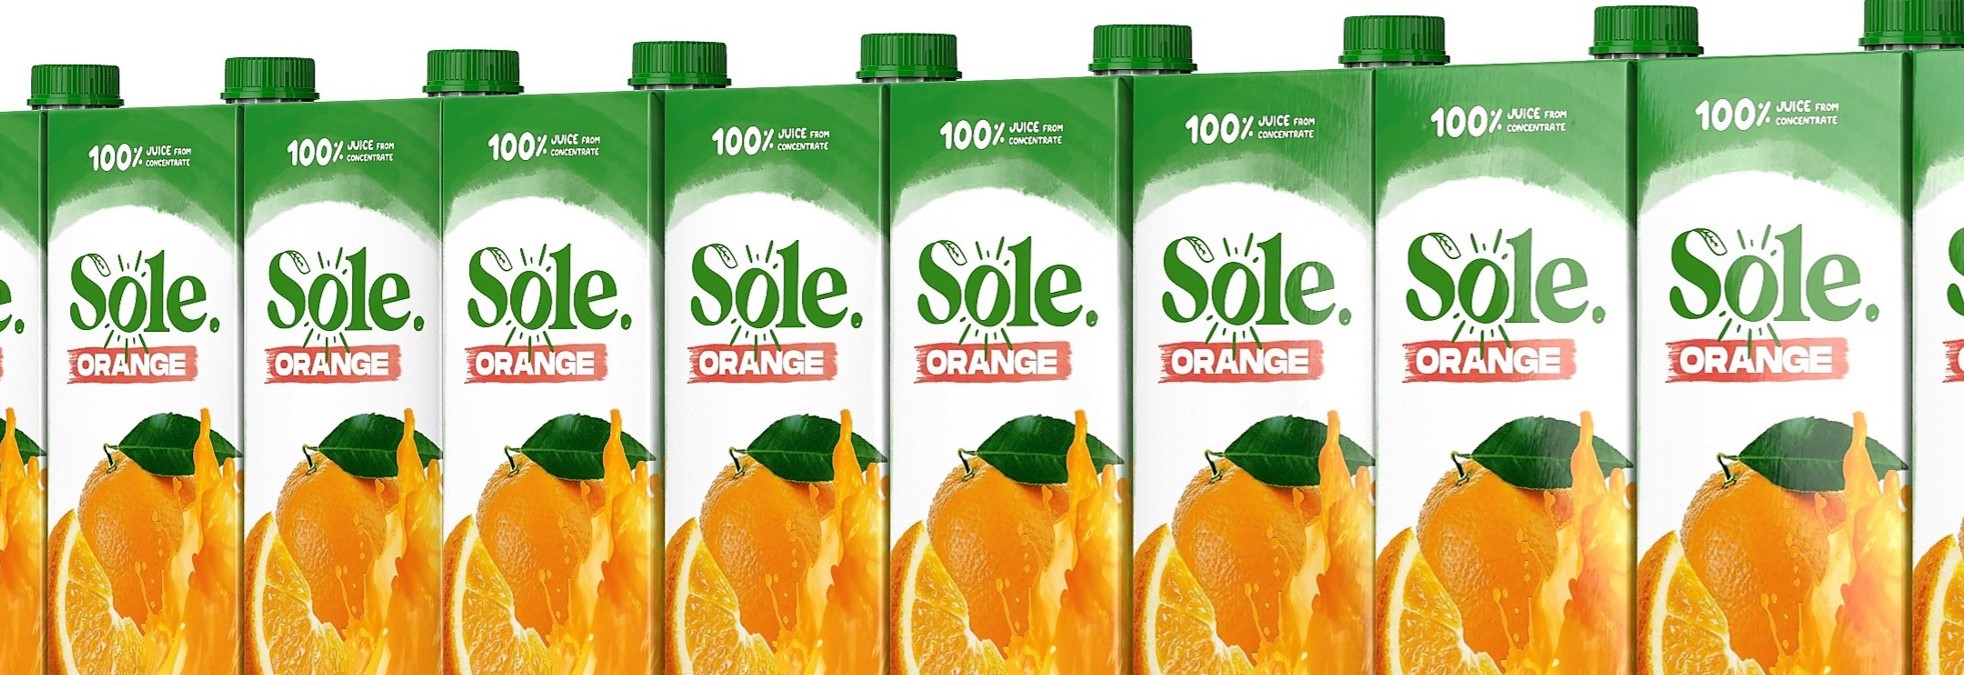 Juice and wine in aseptic carton packaging – the success case of Sole LLC, start-up Liberian company